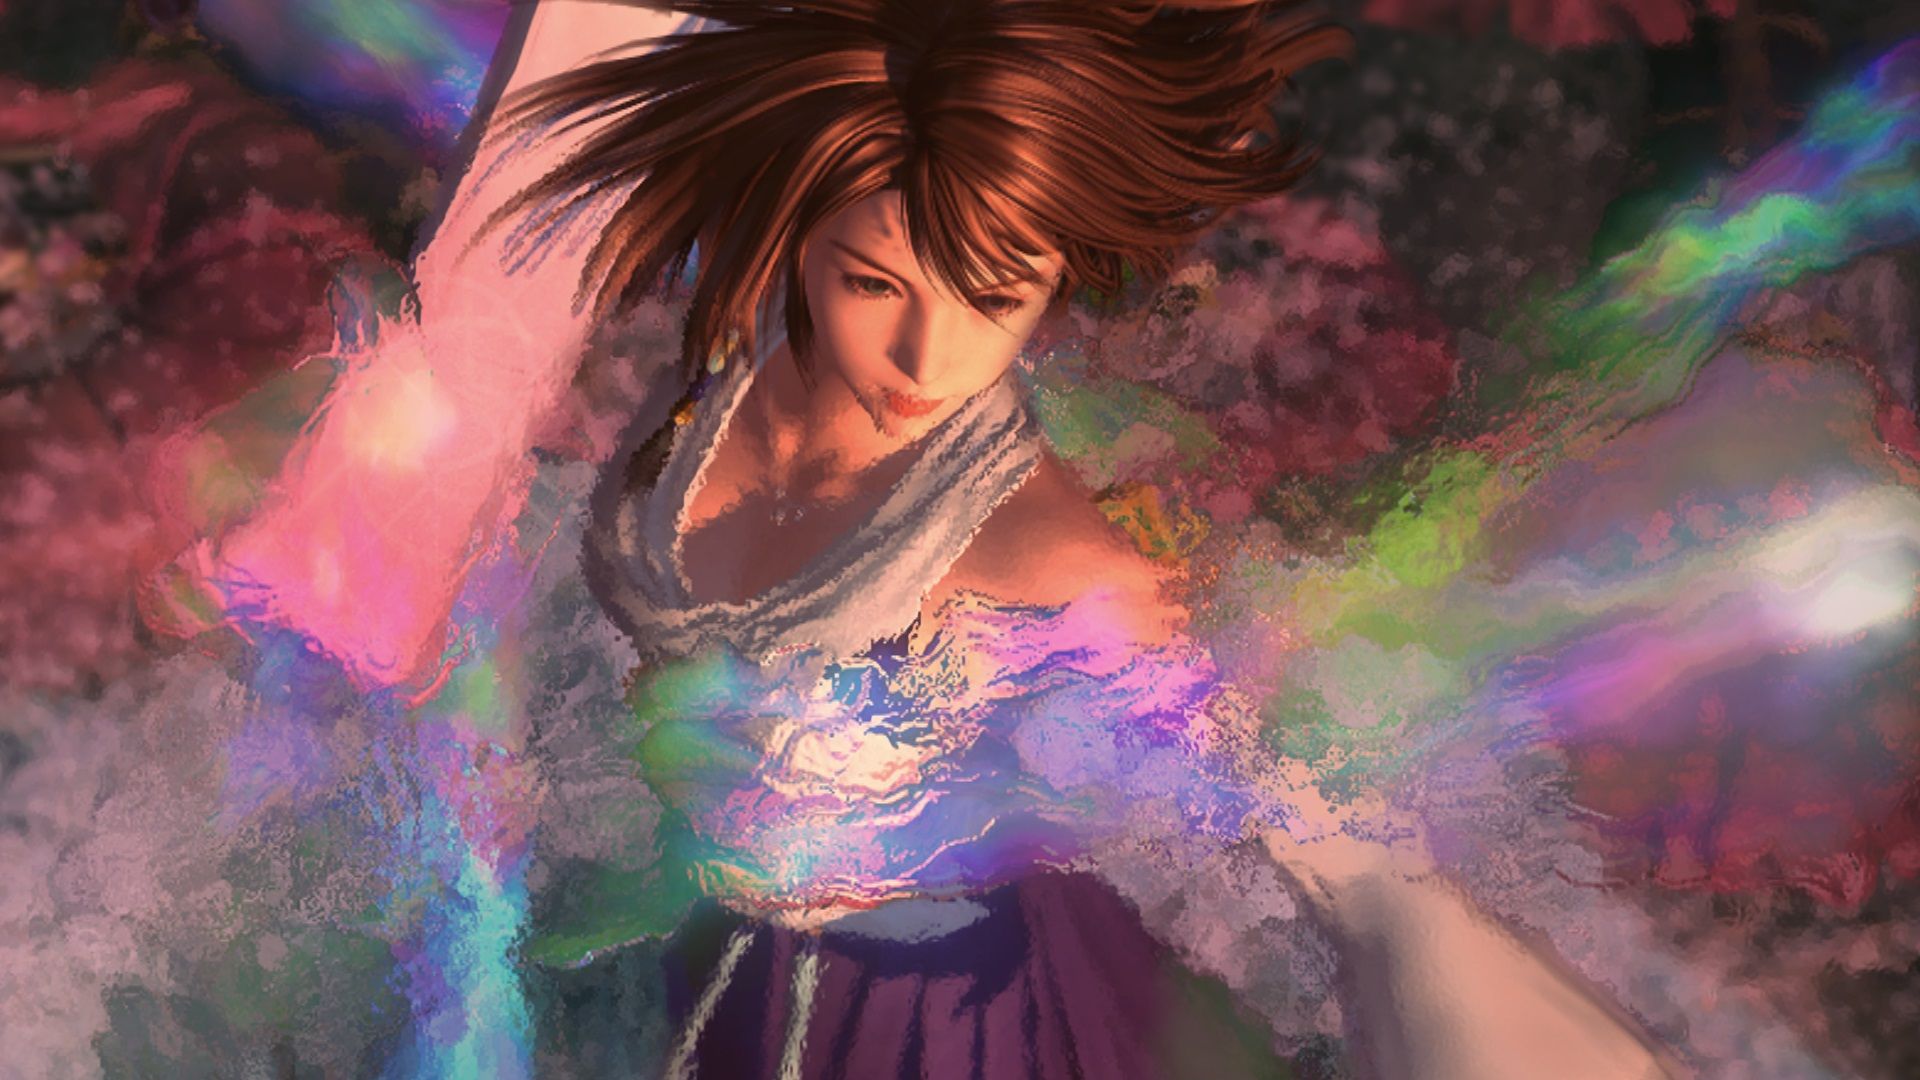 The 15 Most Useless Final Fantasy Characters Ever (And 15 Who Are OP)